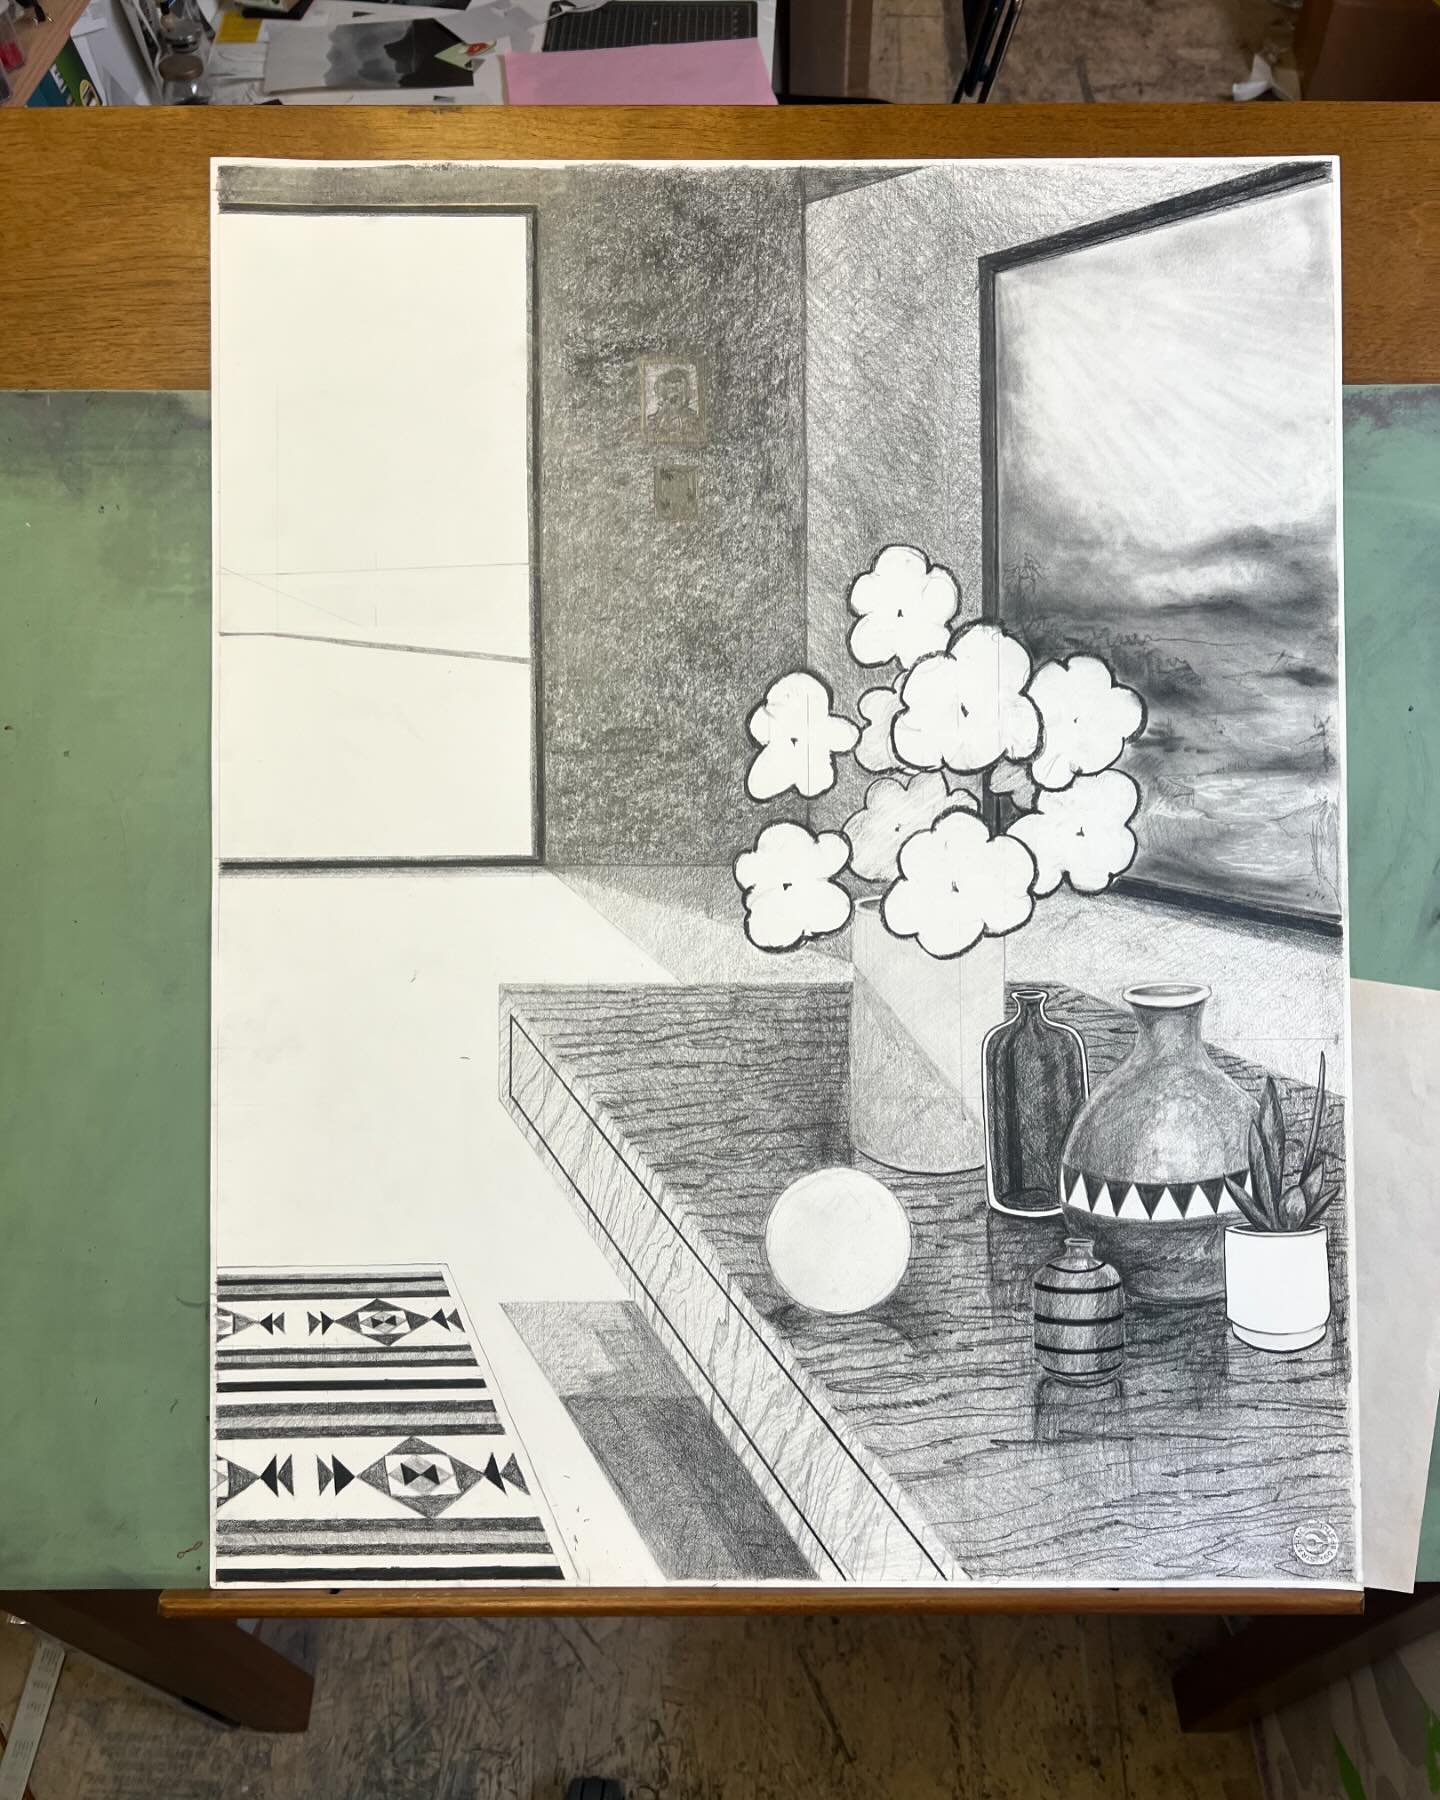 Gettin real close on this one. #contemporarydrawing #graphite #interior